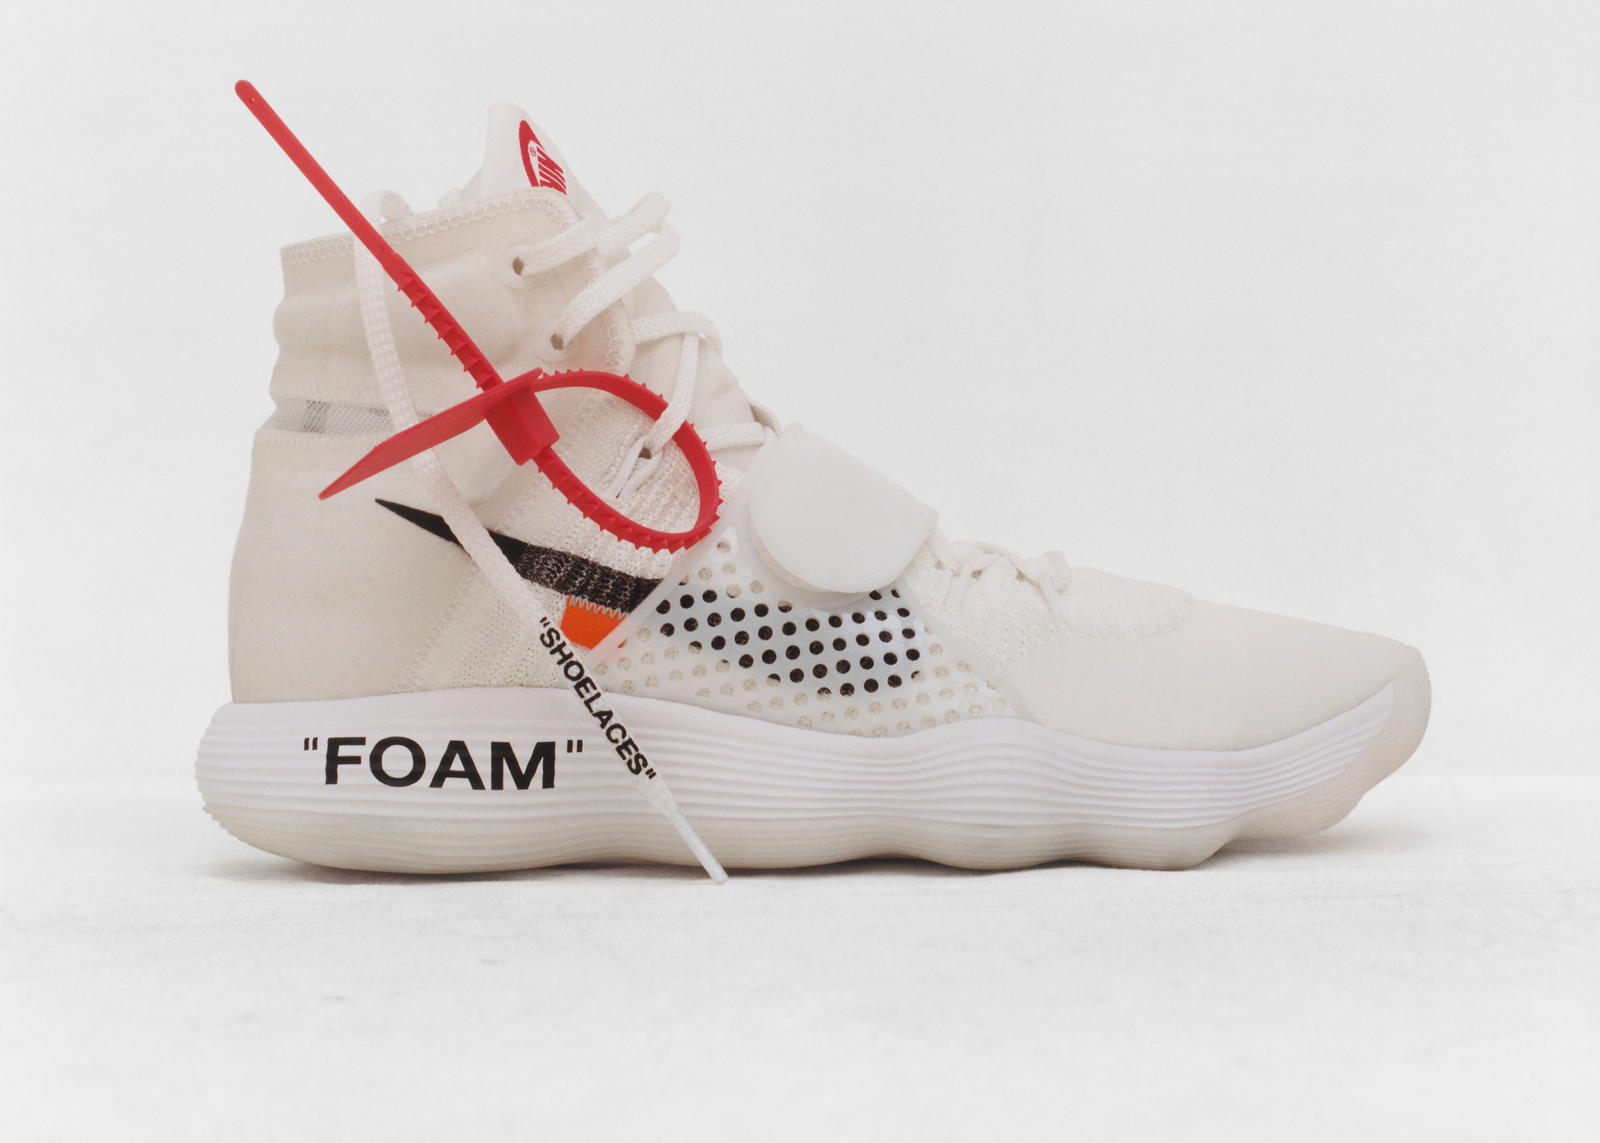 nike off white shoes